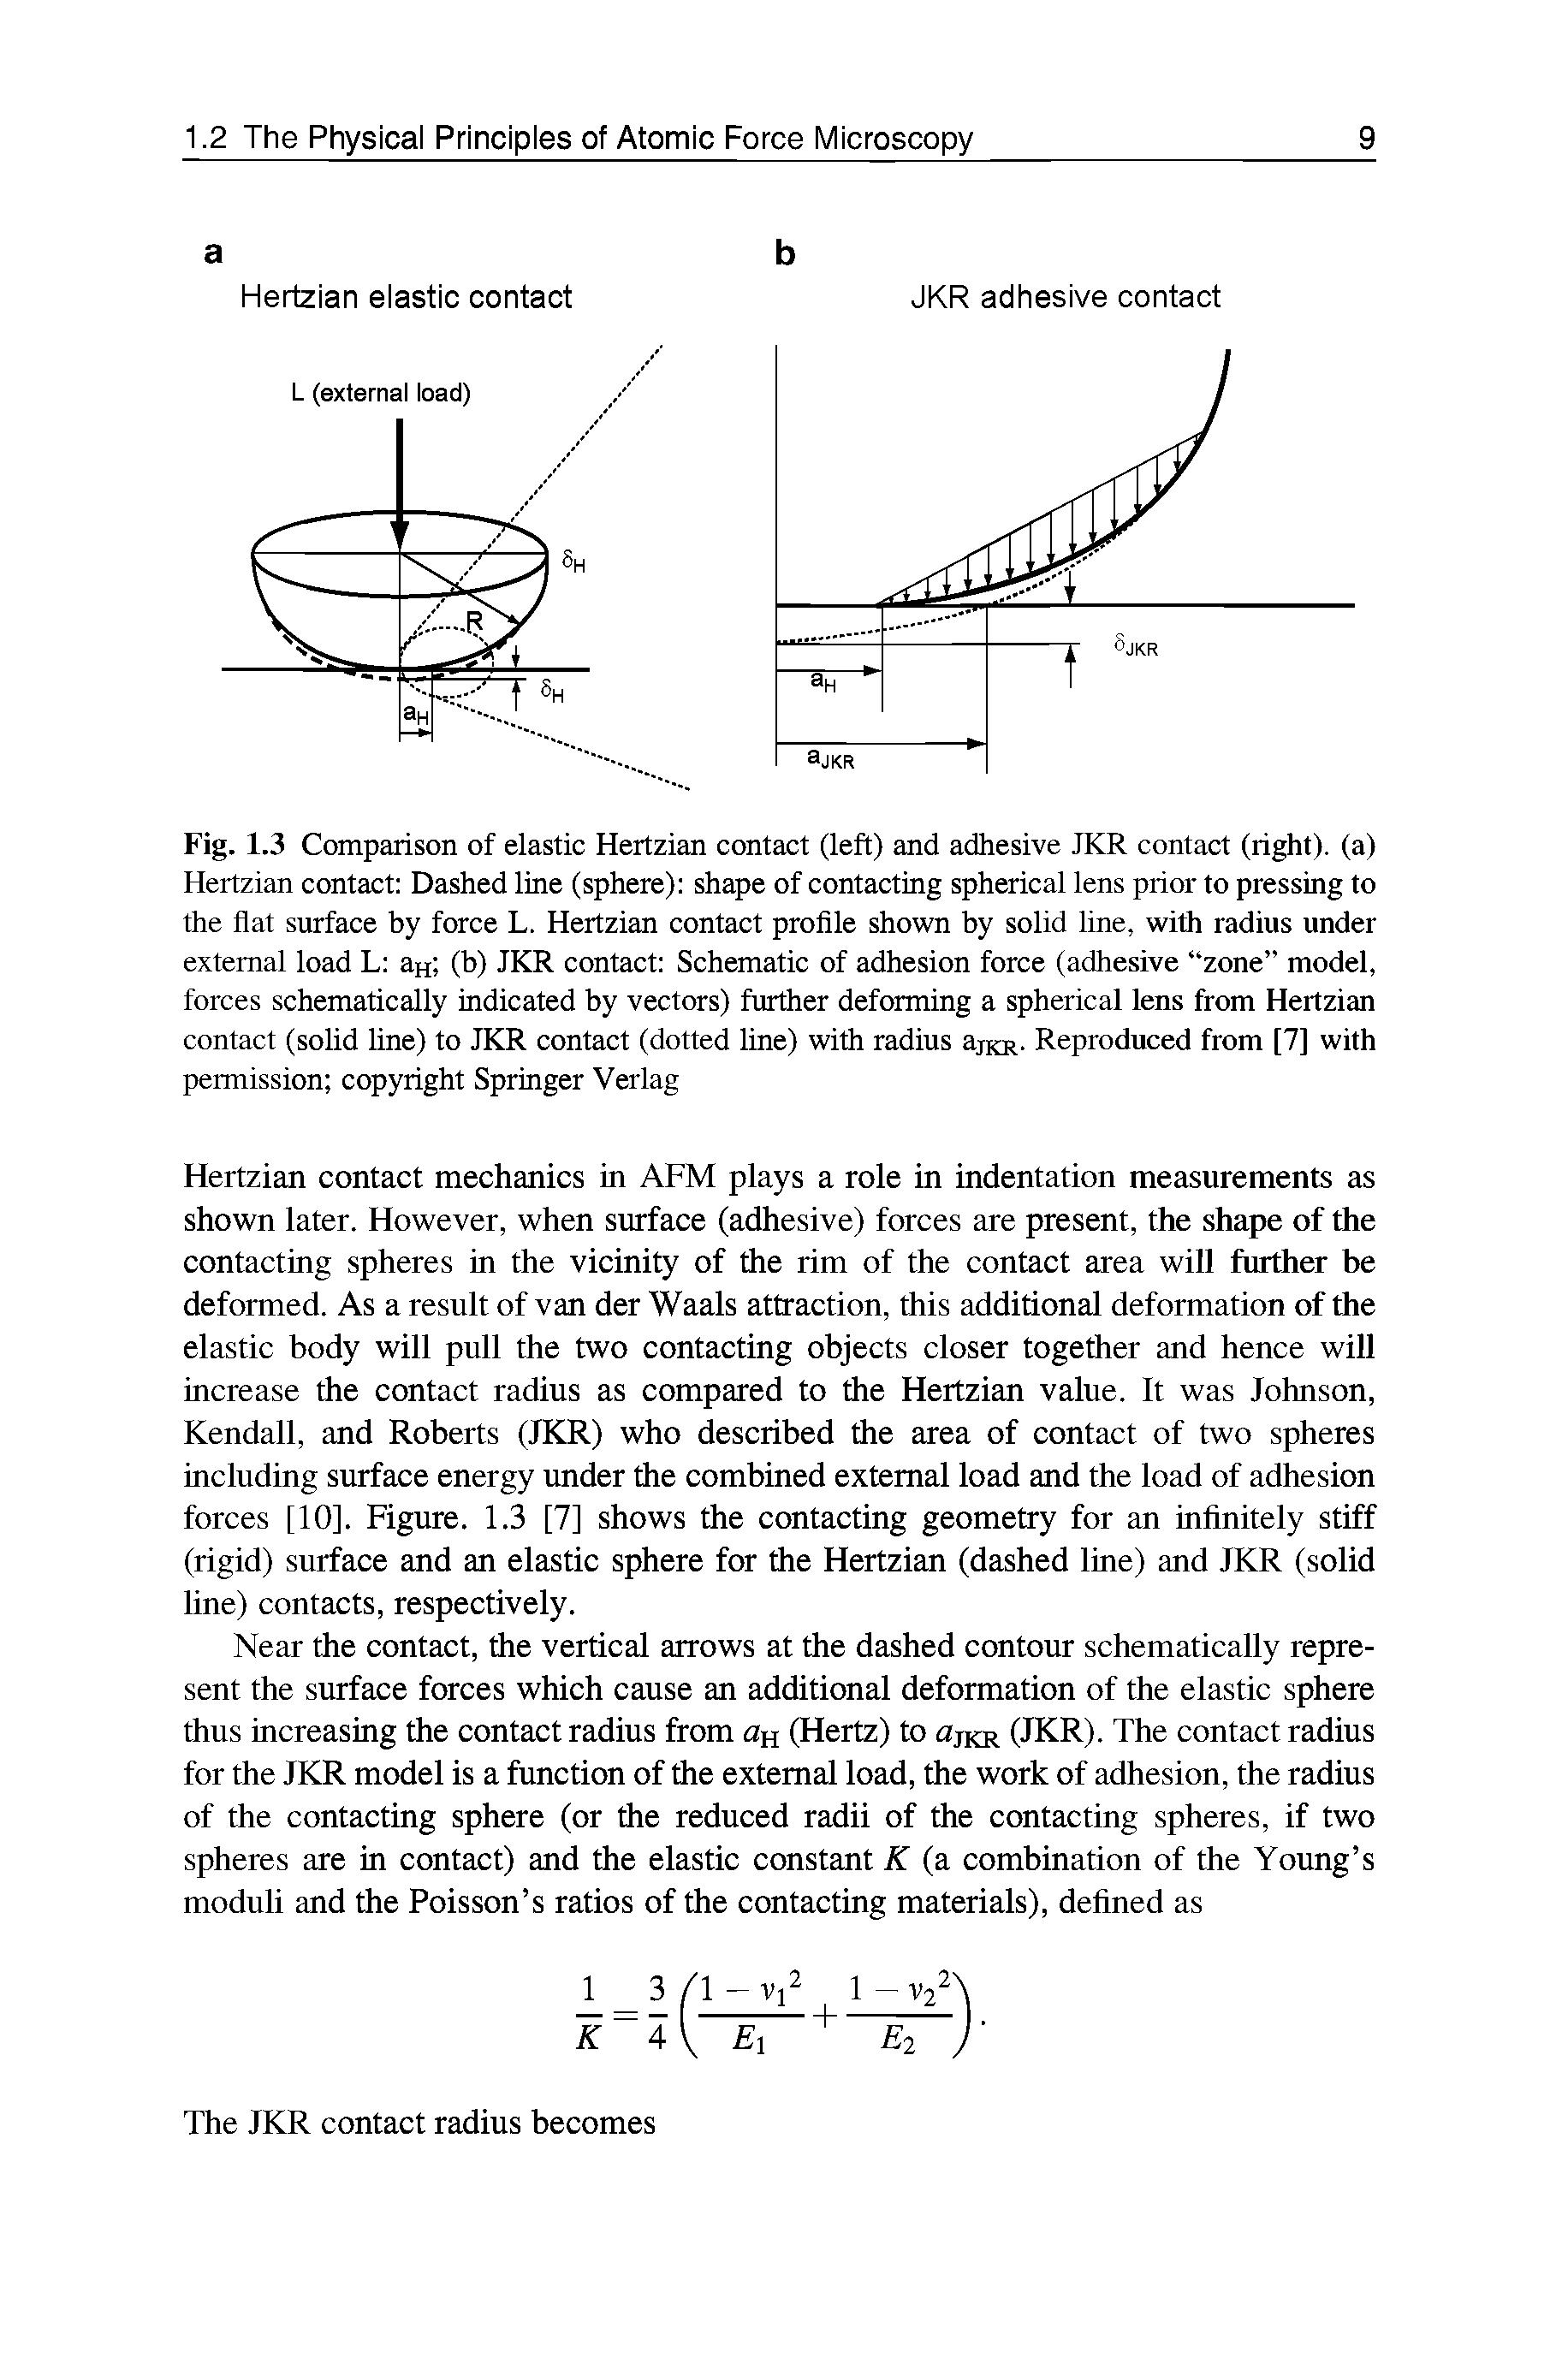 Fig. 1.3 Comparison of elastic Hertzian contact (left) and adhesive JKR contact (right), (a) Hertzian contact Dashed line (sphere) shape of contacting spherical lens prior to pressing to the flat surface by force L. Hertzian contact profile shown by solid line, with radius under external load L aH (b) JKR contact Schematic of adhesion force (adhesive zone model, forces schematically indicated by vectors) further deforming a spherical lens from Hertzian contact (solid line) to JKR contact (dotted line) with radius aJKR. Reproduced from [7] with permission copyright Springer Verlag...